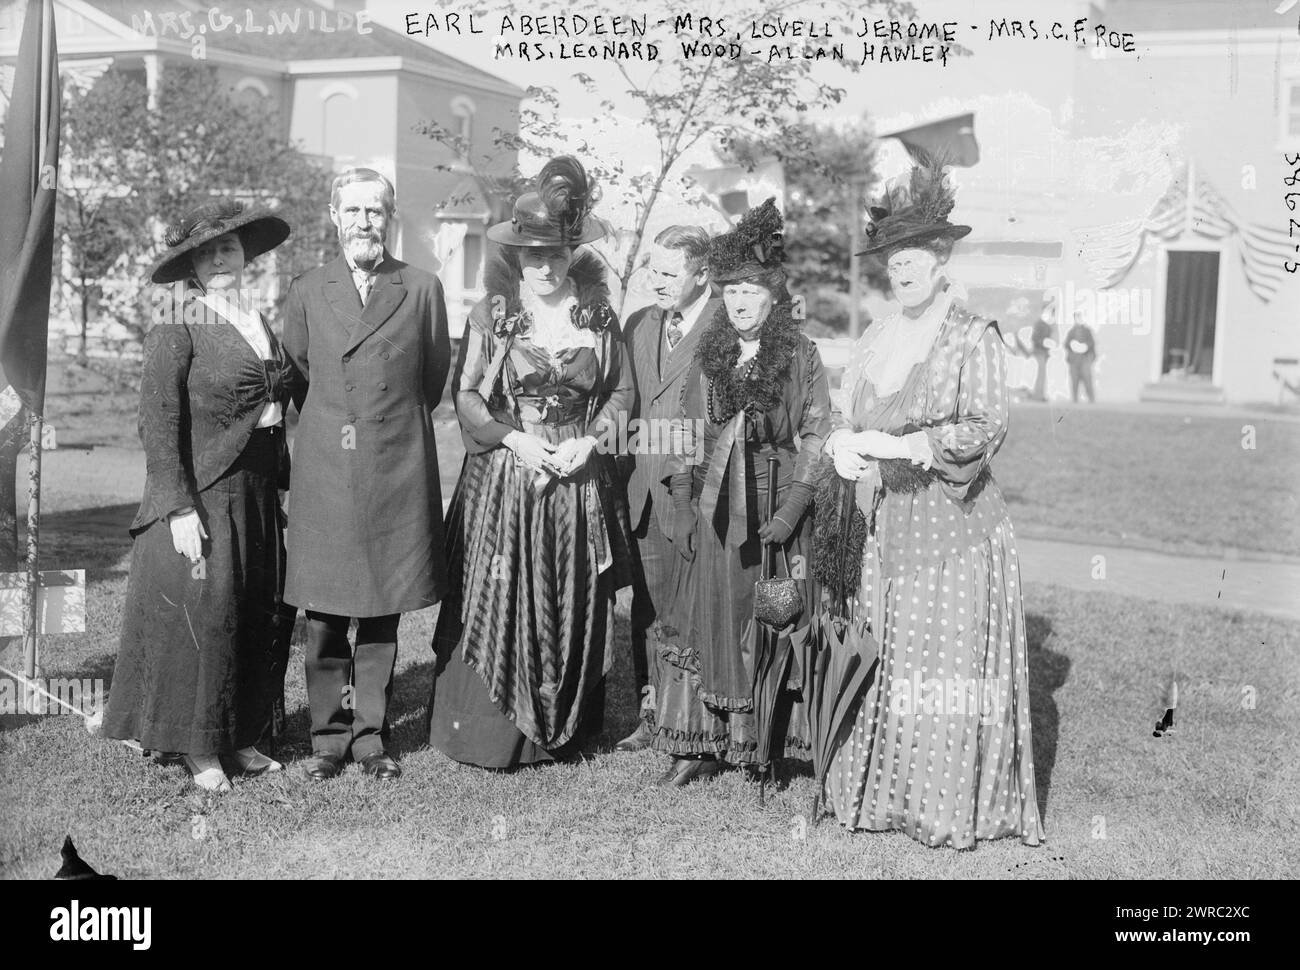 Mrs. G.L. Wilde, Earl of Aberdeen, Mrs. Lovell Jerome, Mrs. C.F. Roe, Mrs. Leonard Wood, Allan Hawley, Photograph shows Mrs. George L. Wilde; John Campbell Hamilton-Gordon, Marquess of Aberdeen ane Temair; Mrs. Lovell Jerome; Mrs. Charles F. Roe; Mrs. Leonard Wood; and aviator Alan R. Hawley at a garden party on Governor's Island, New York, on May 26, 1916., 1916 May, Glass negatives, 1 negative: glass Stock Photo